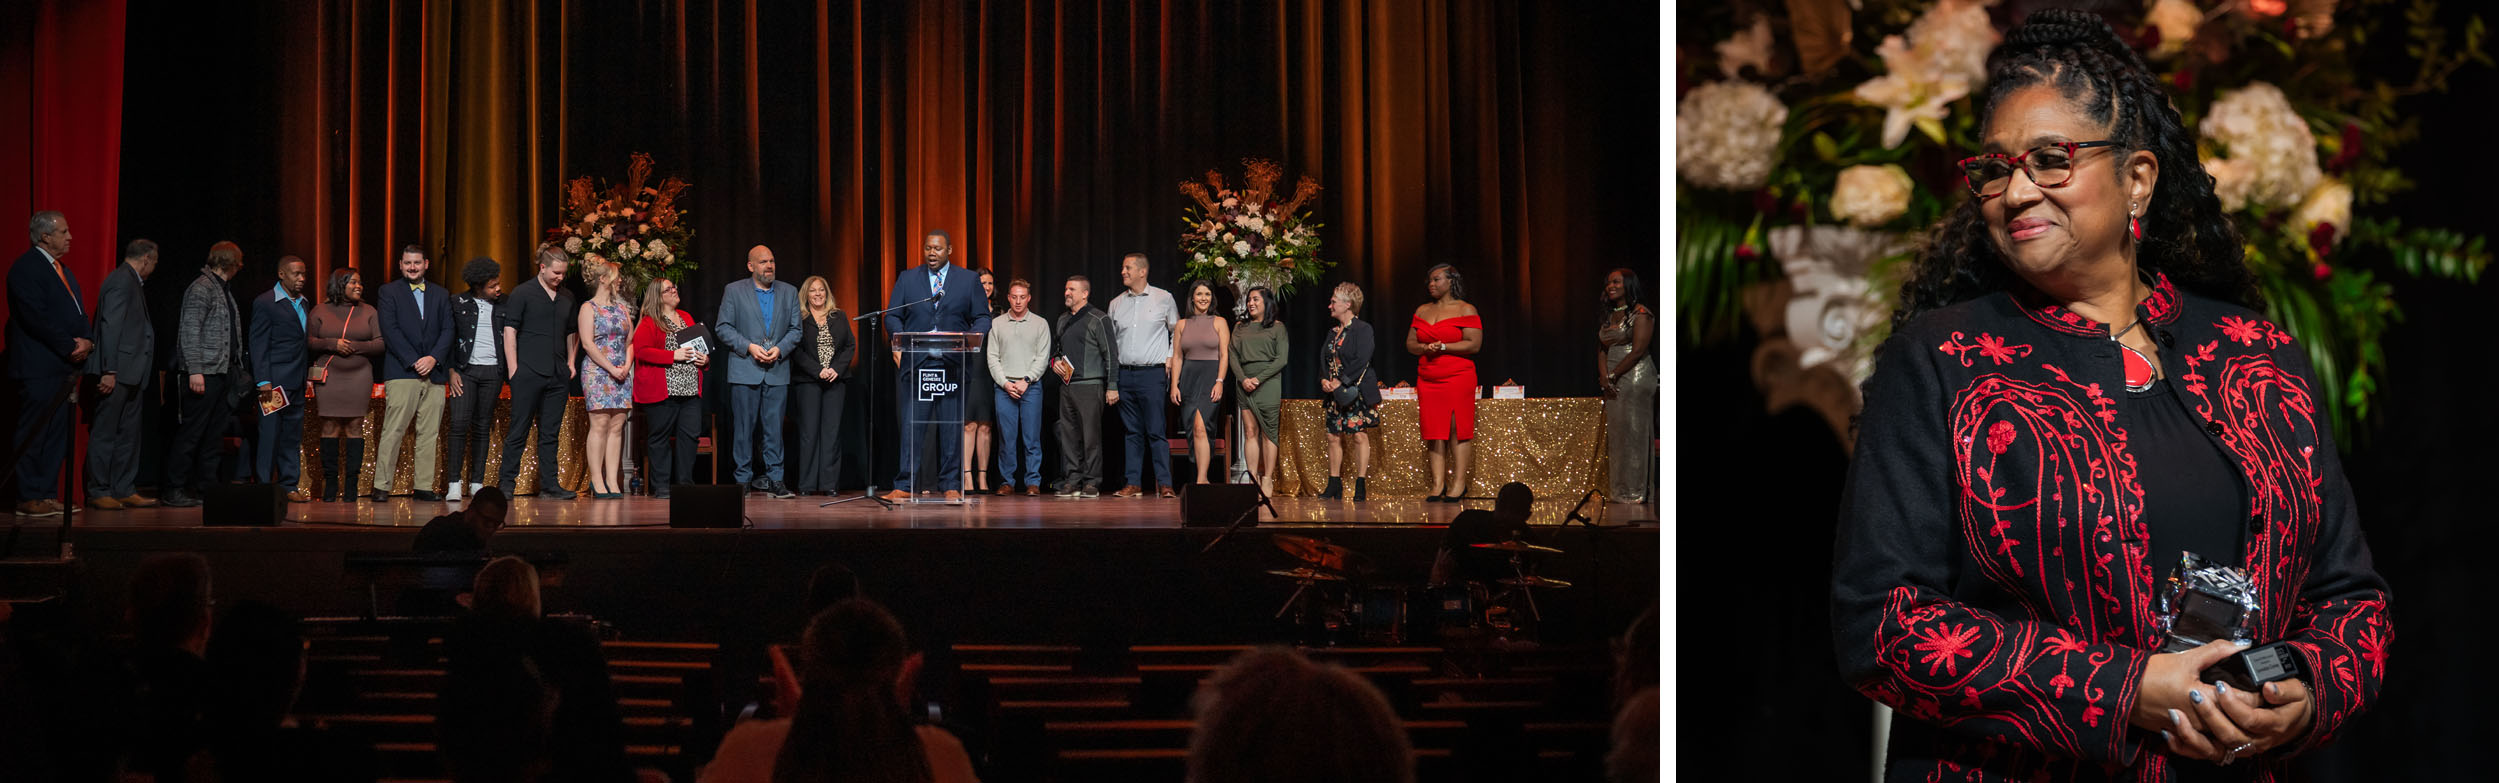 Award winners accept their award on the stage at the Flint Capitol Theatre